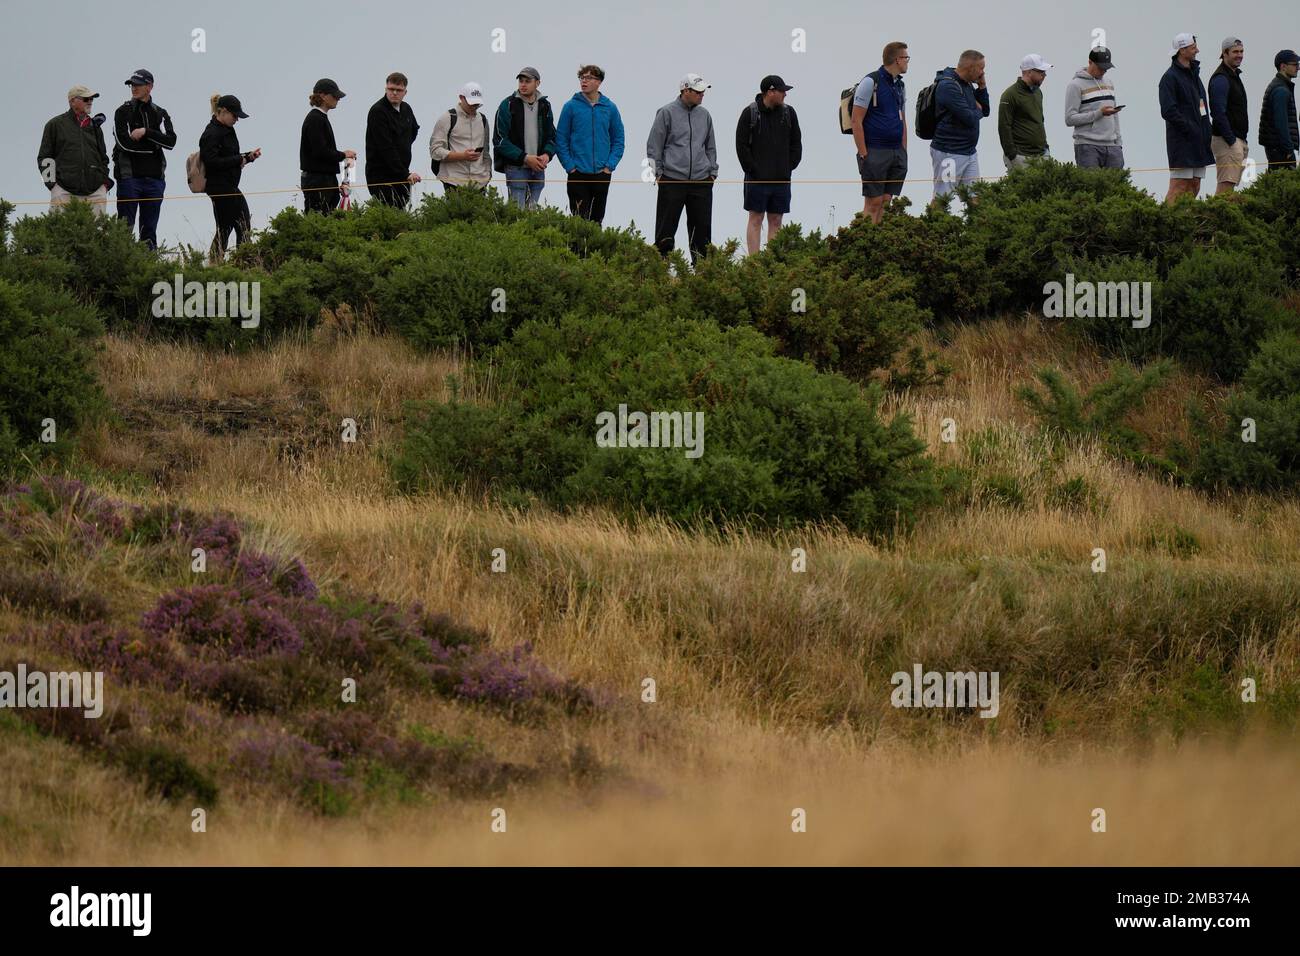 Spectators watch the second round of the British Open golf championship on the Old Course at St